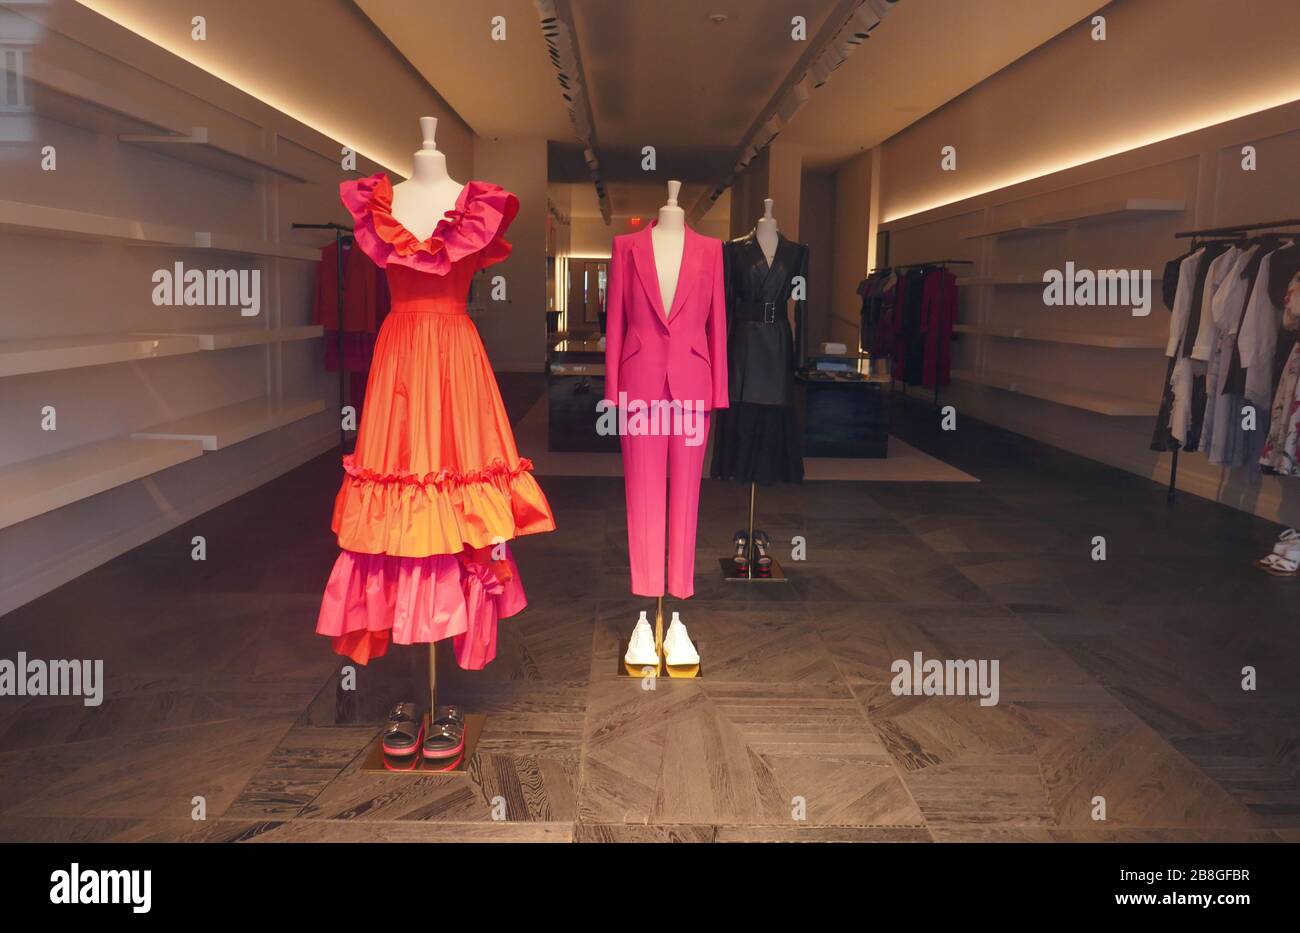 Beverly Hills, California: Alexander McQueen fashion store on Rodeo Drive,  Beverly Hills Stock Photo - Alamy